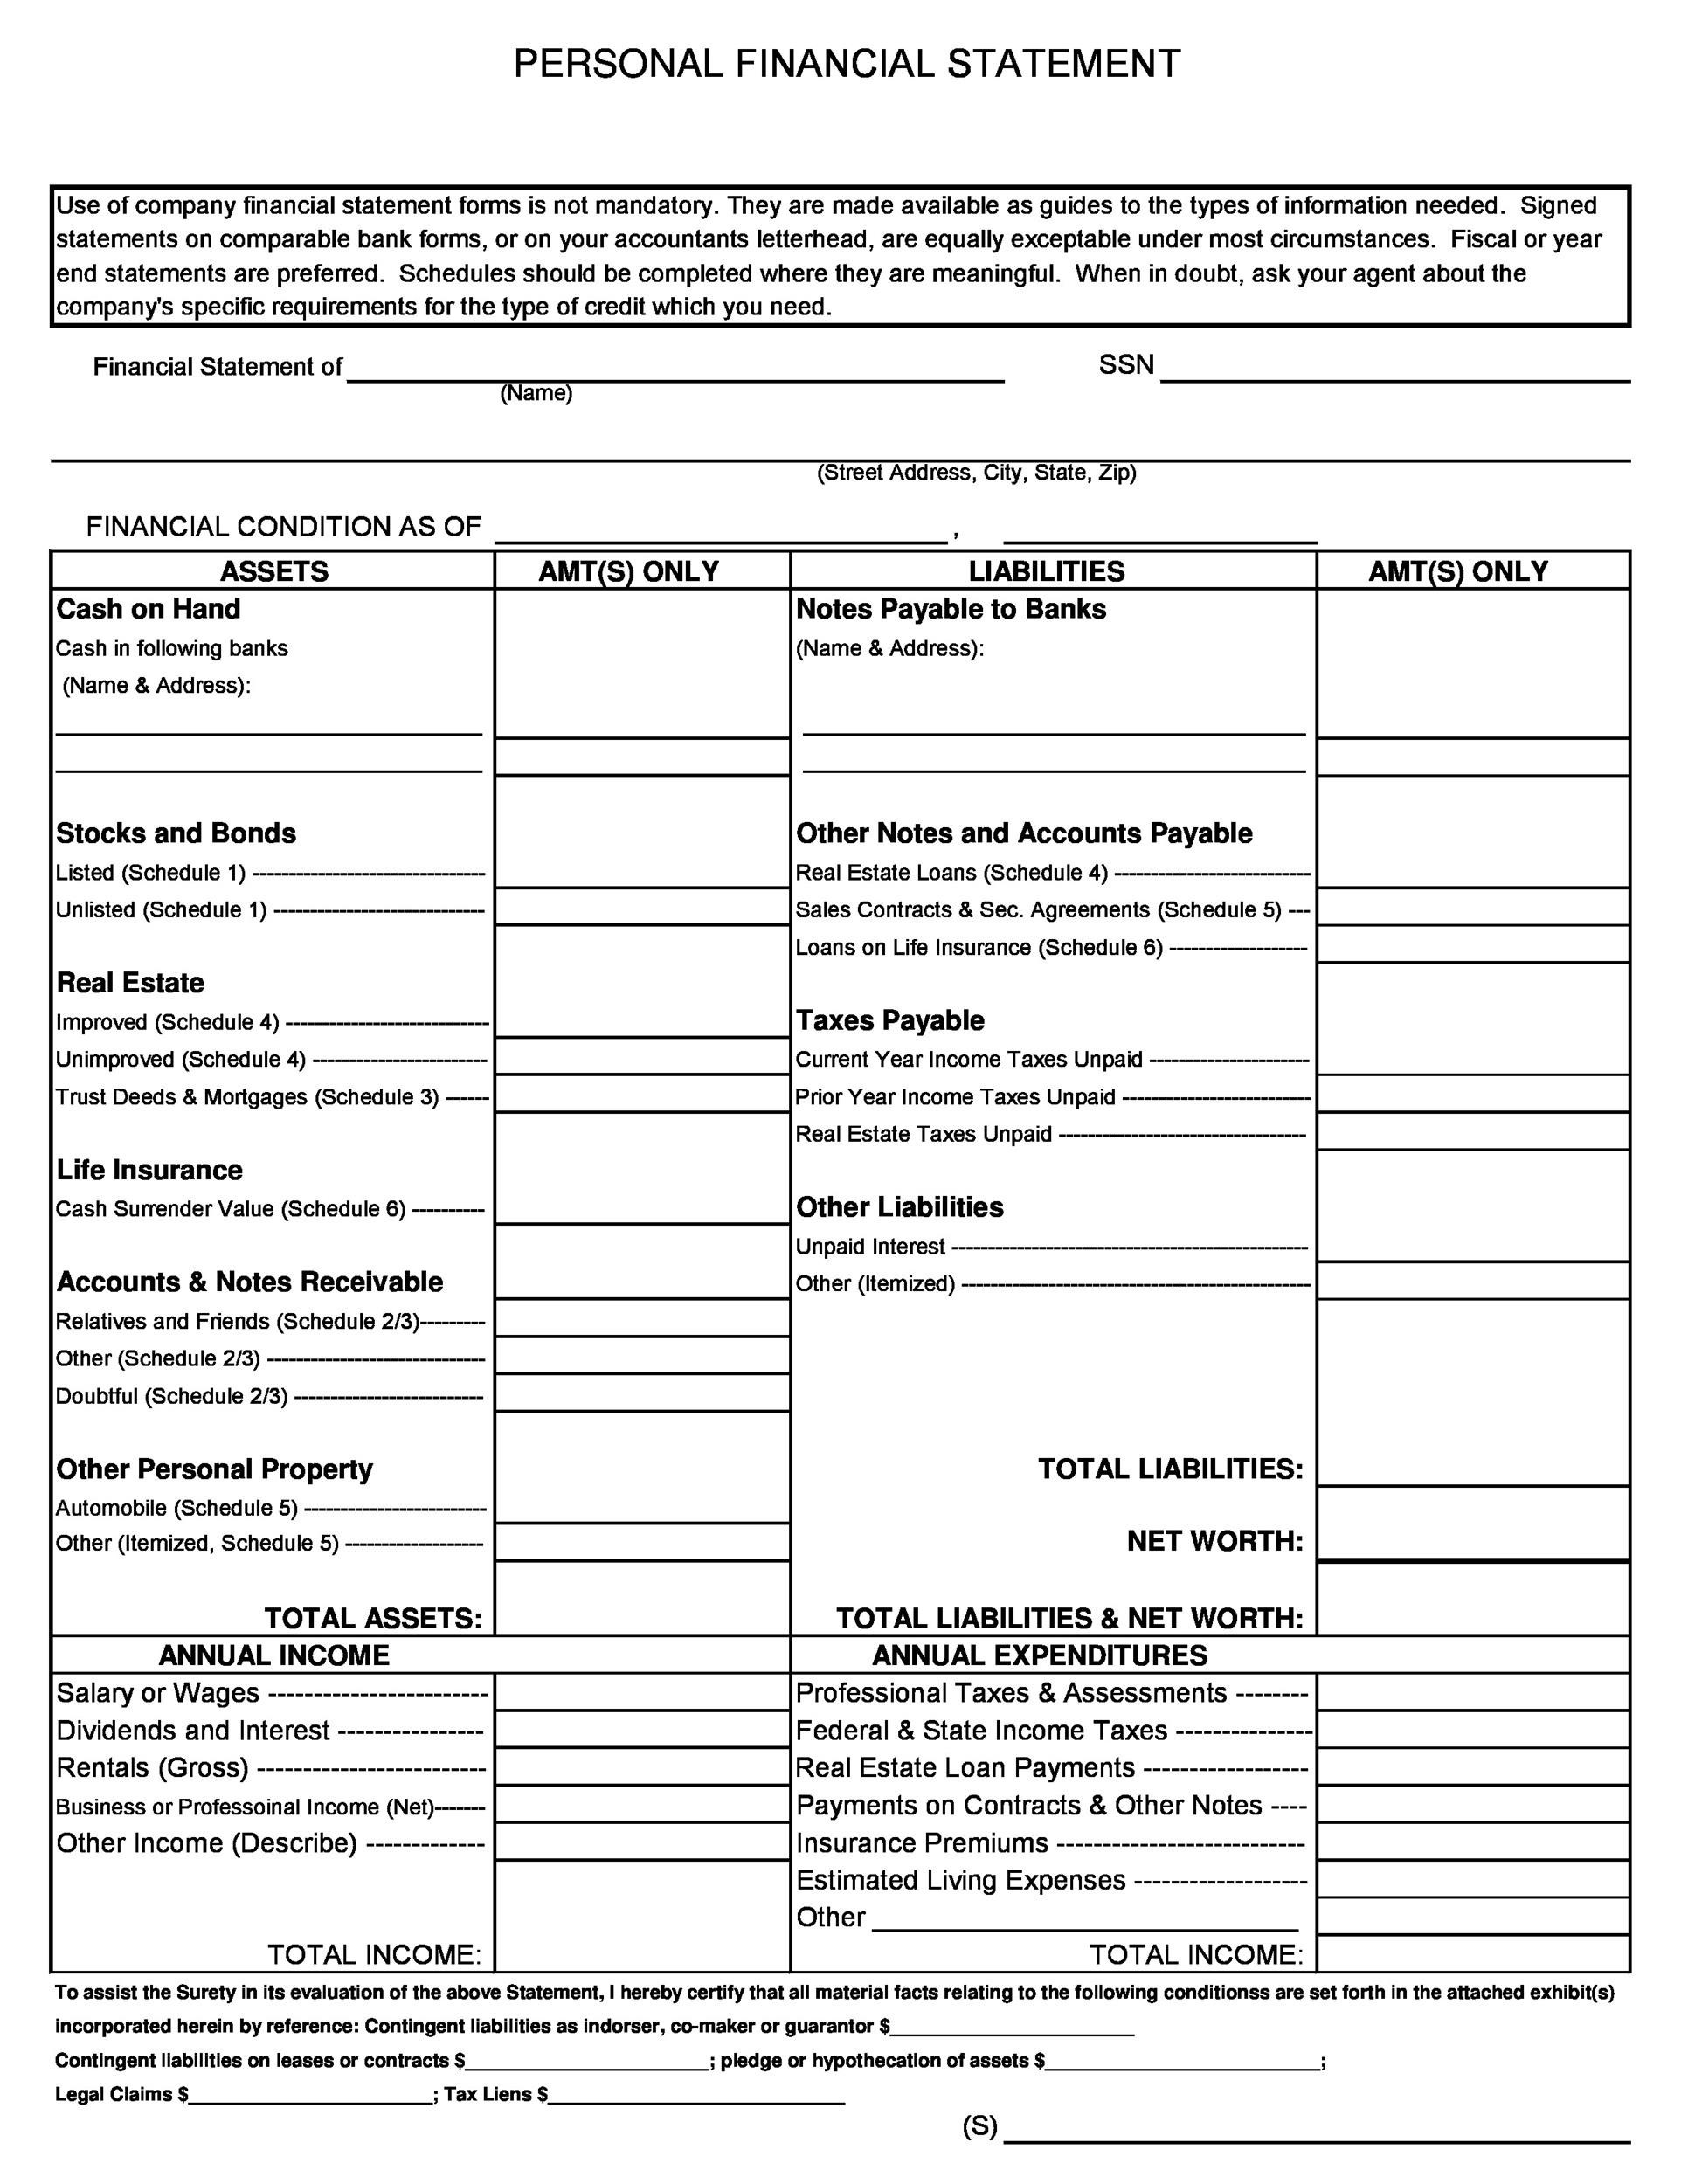 personal-financial-statement-template-word-personal-financial